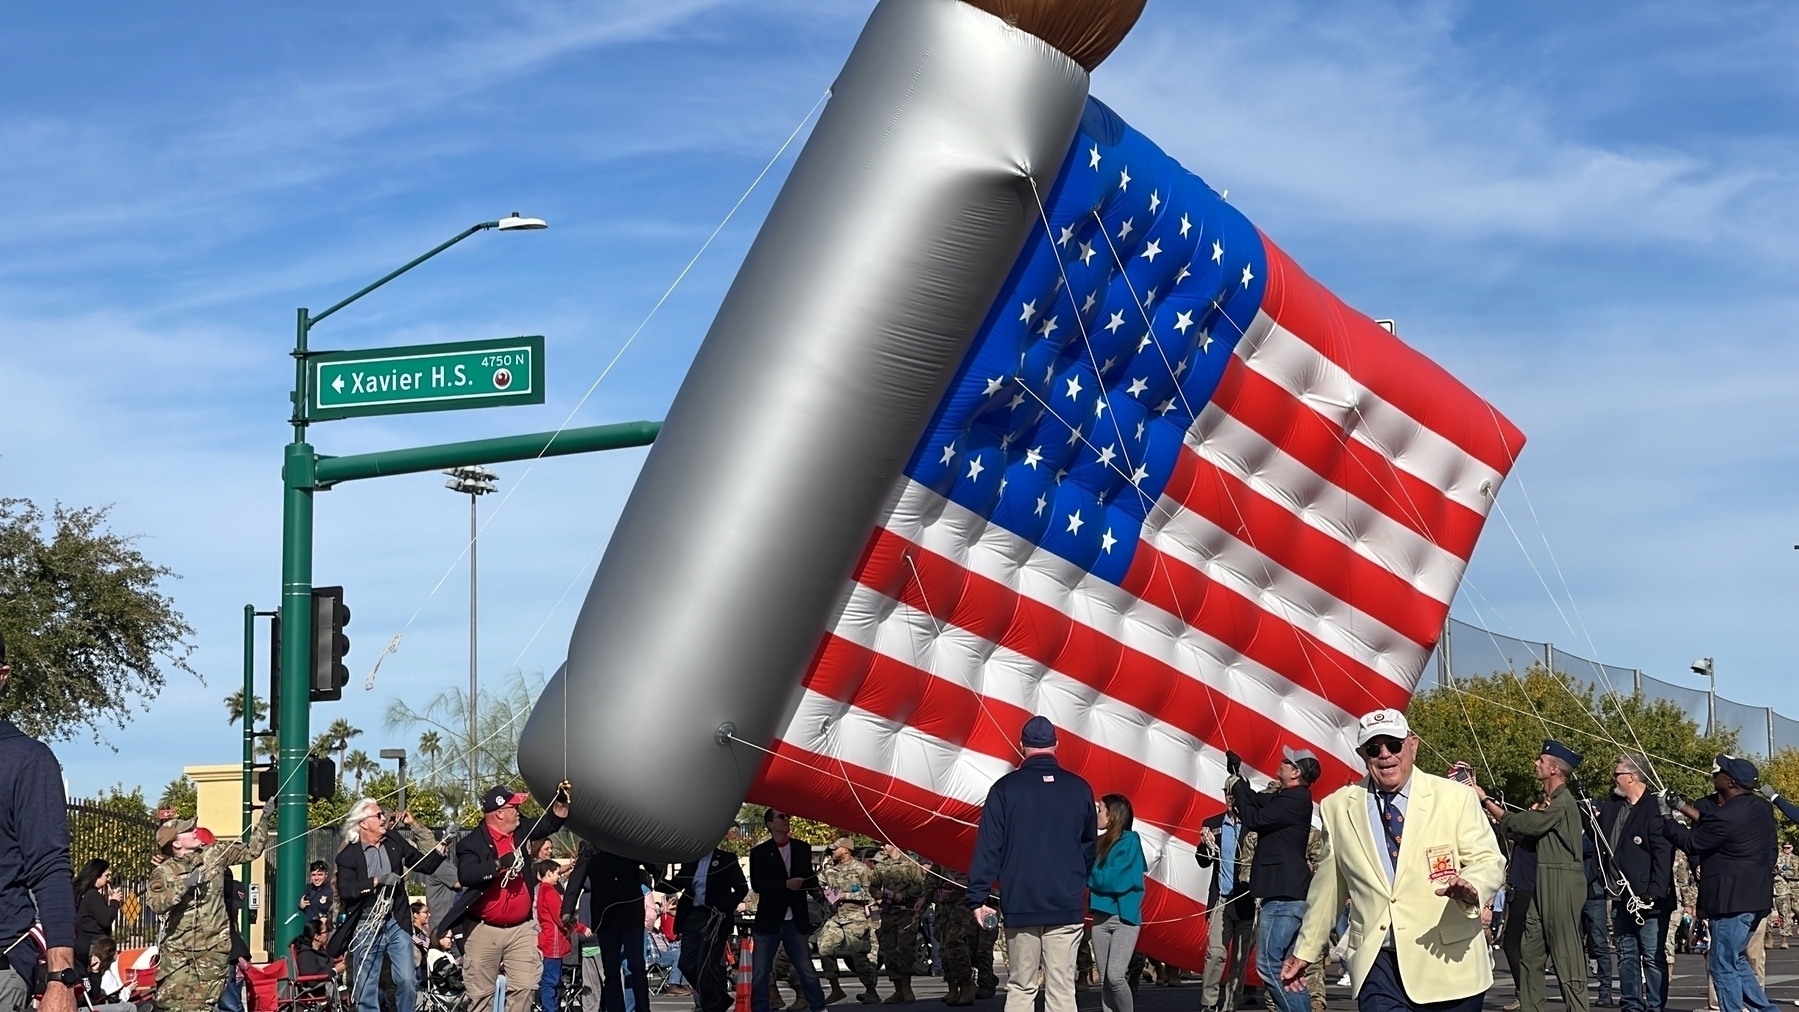 Inflatable American flag as parade float